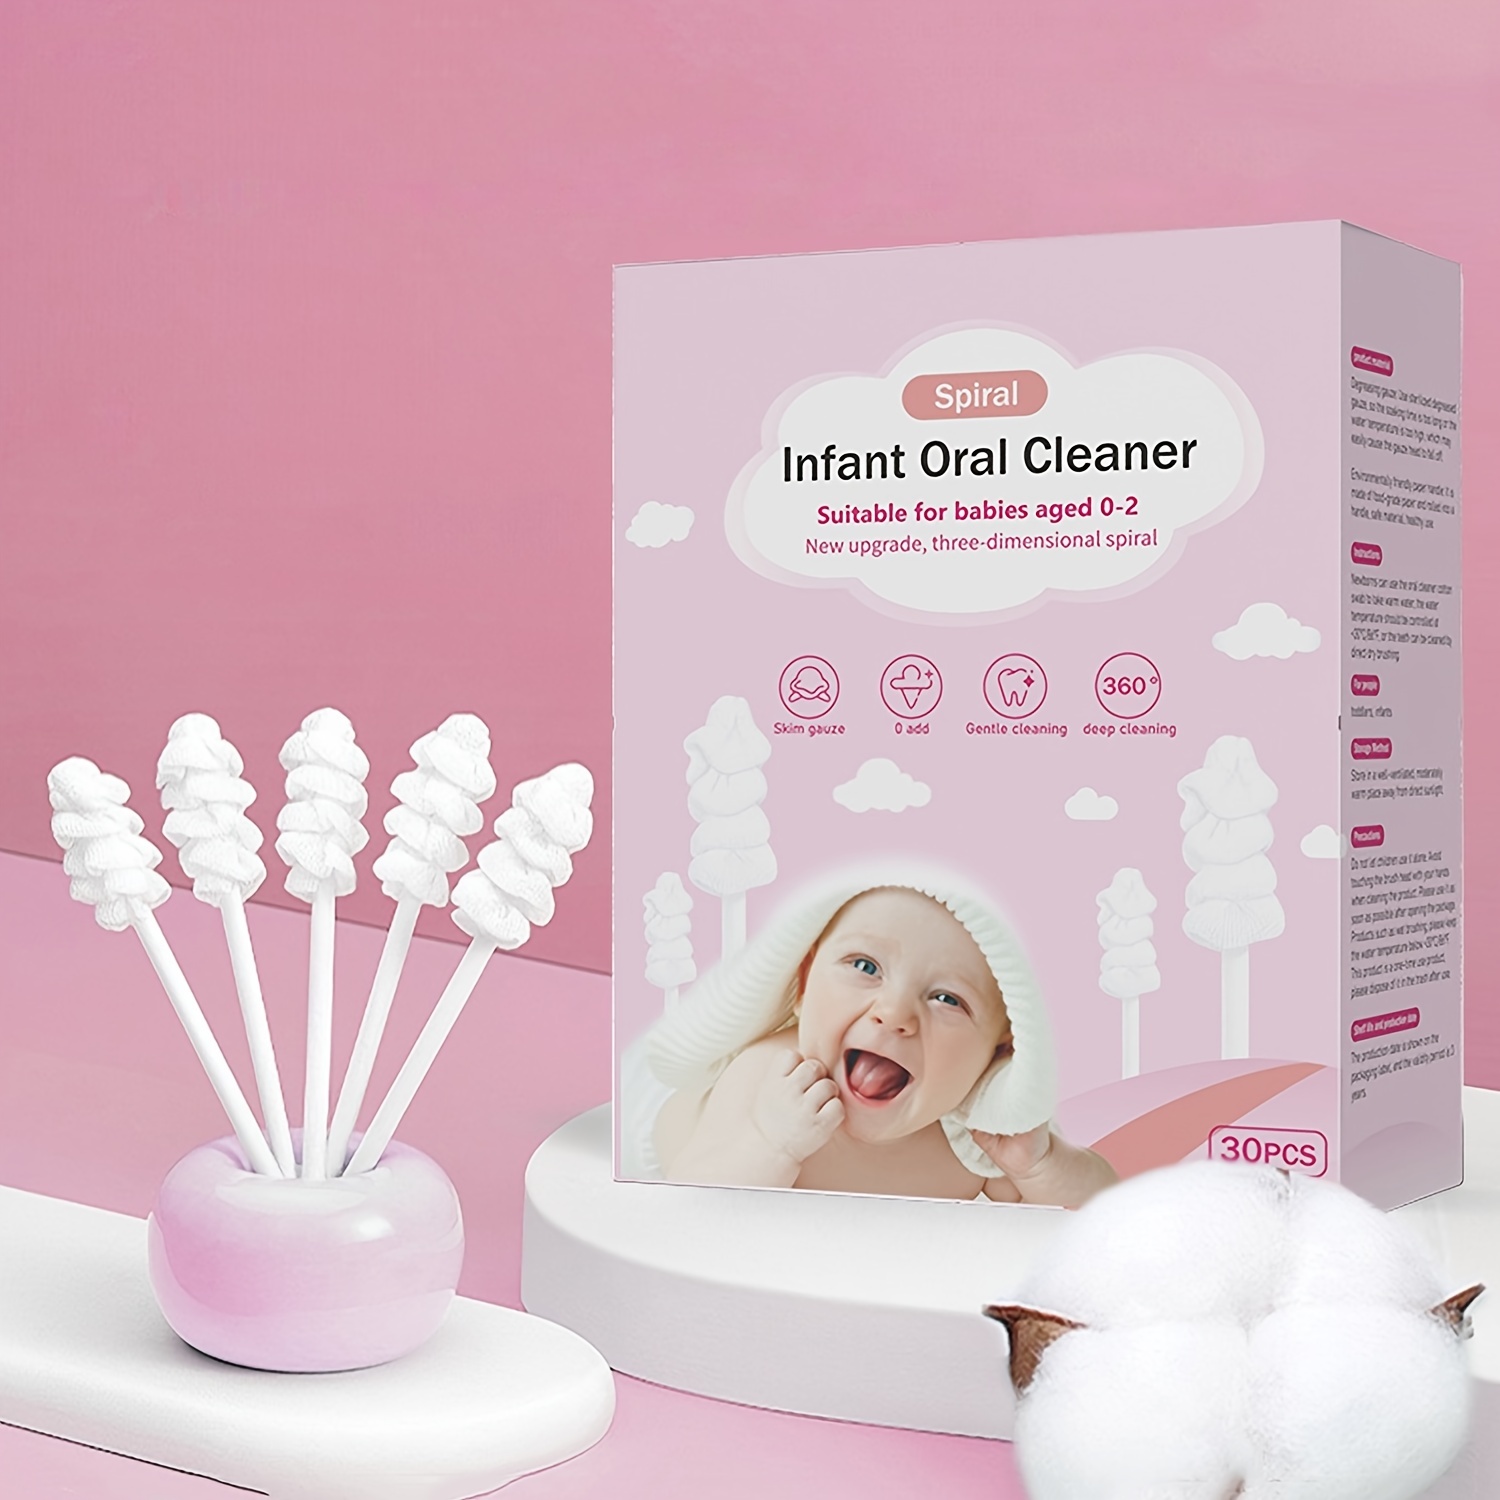 30pcs Baby Tongue Cleaner for Babies 0-2 years old